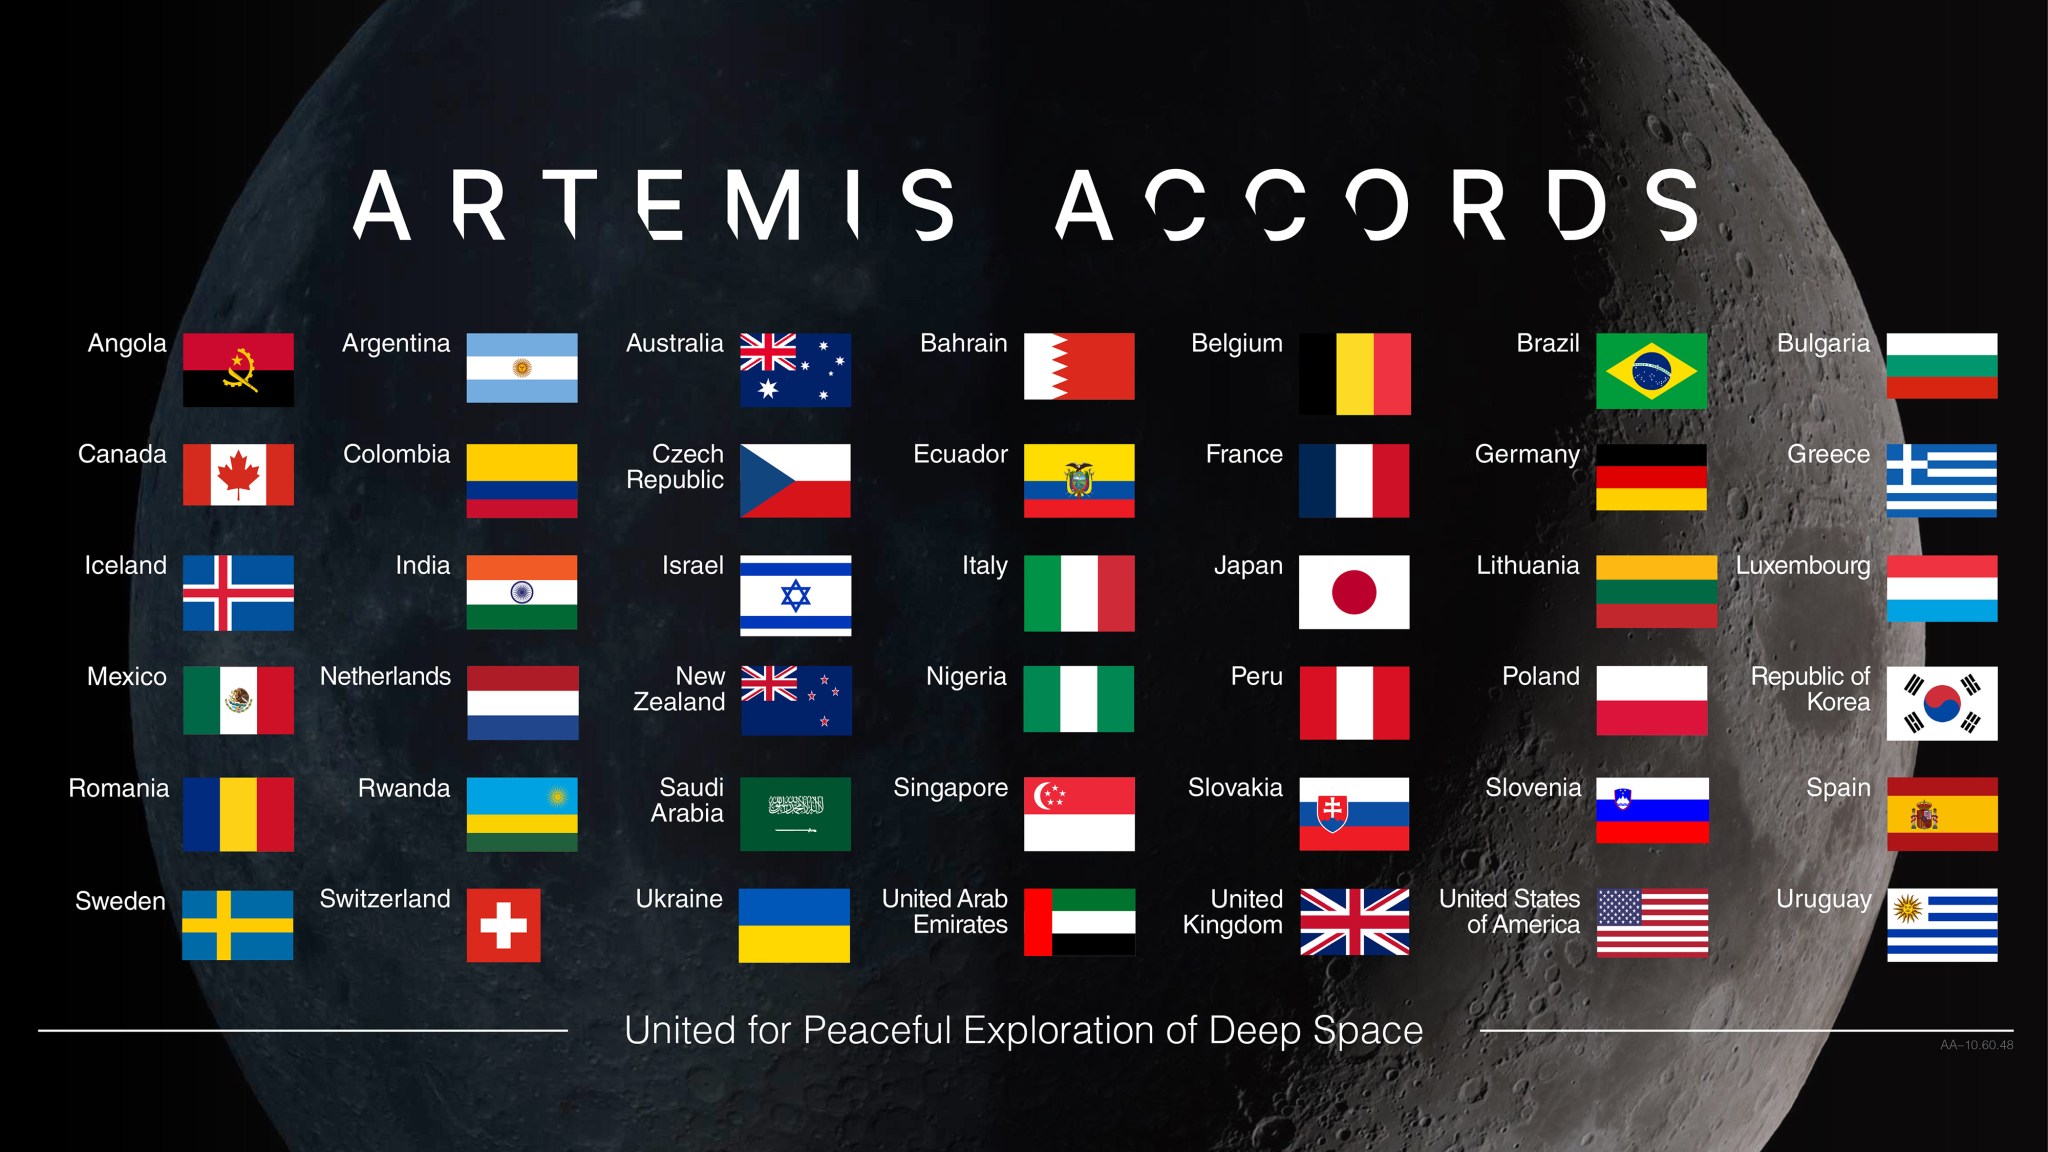 This graphic displays the flags of the nations that have signed the Artemis Accords against a background image of the Moon in the blackness of space. The graphic is titled “Artemis Accords.” The words, “United for Peaceful Exploration of Deep Space” appear on the bottom of the image.